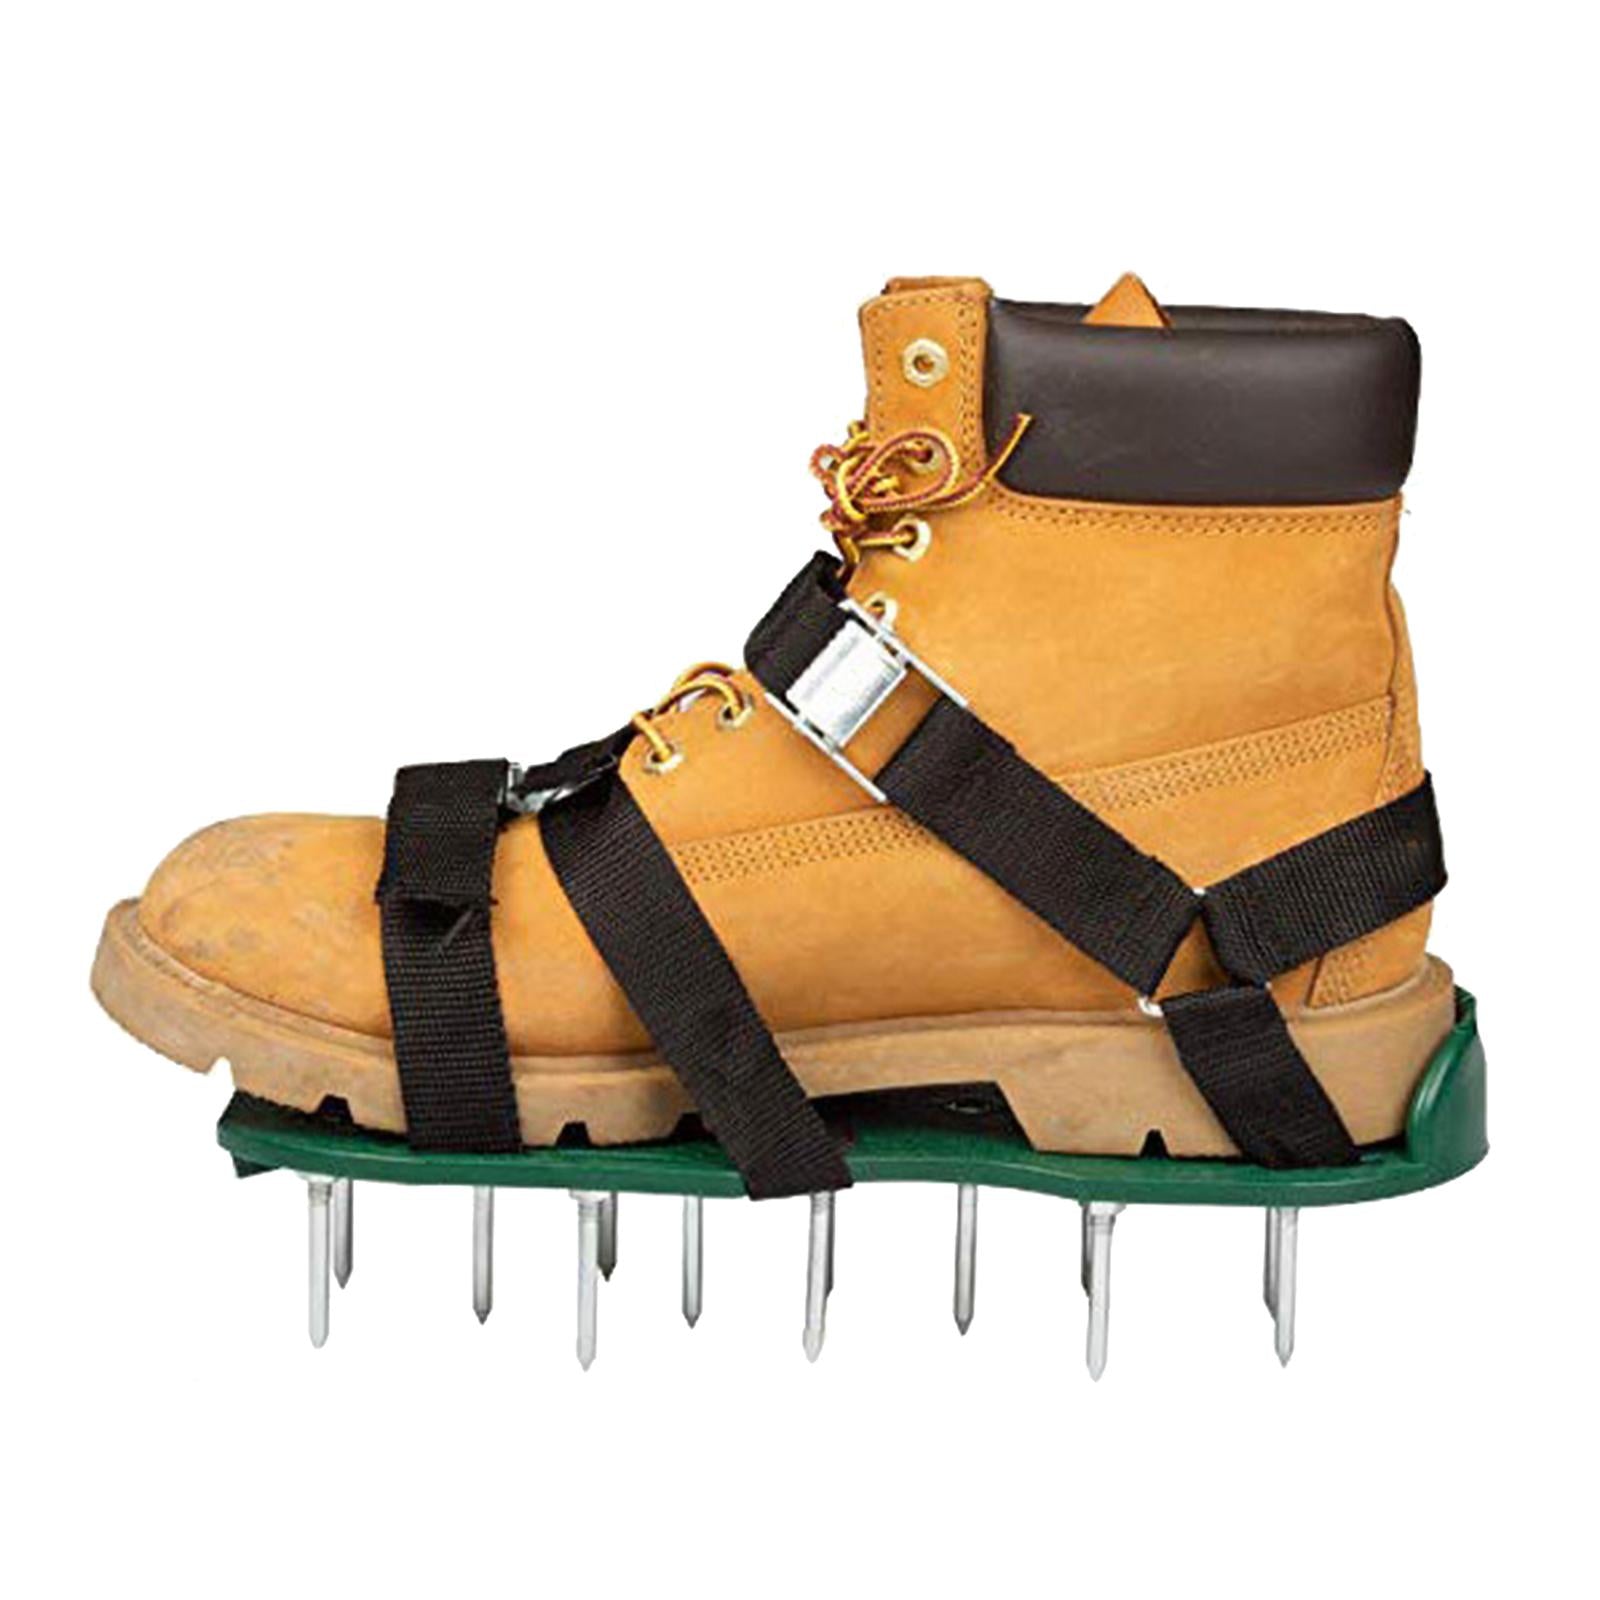 Lawn Aerator Shoes with Straps Lawn Aerator Lawn Aerator for Garden Outdoor Lawn